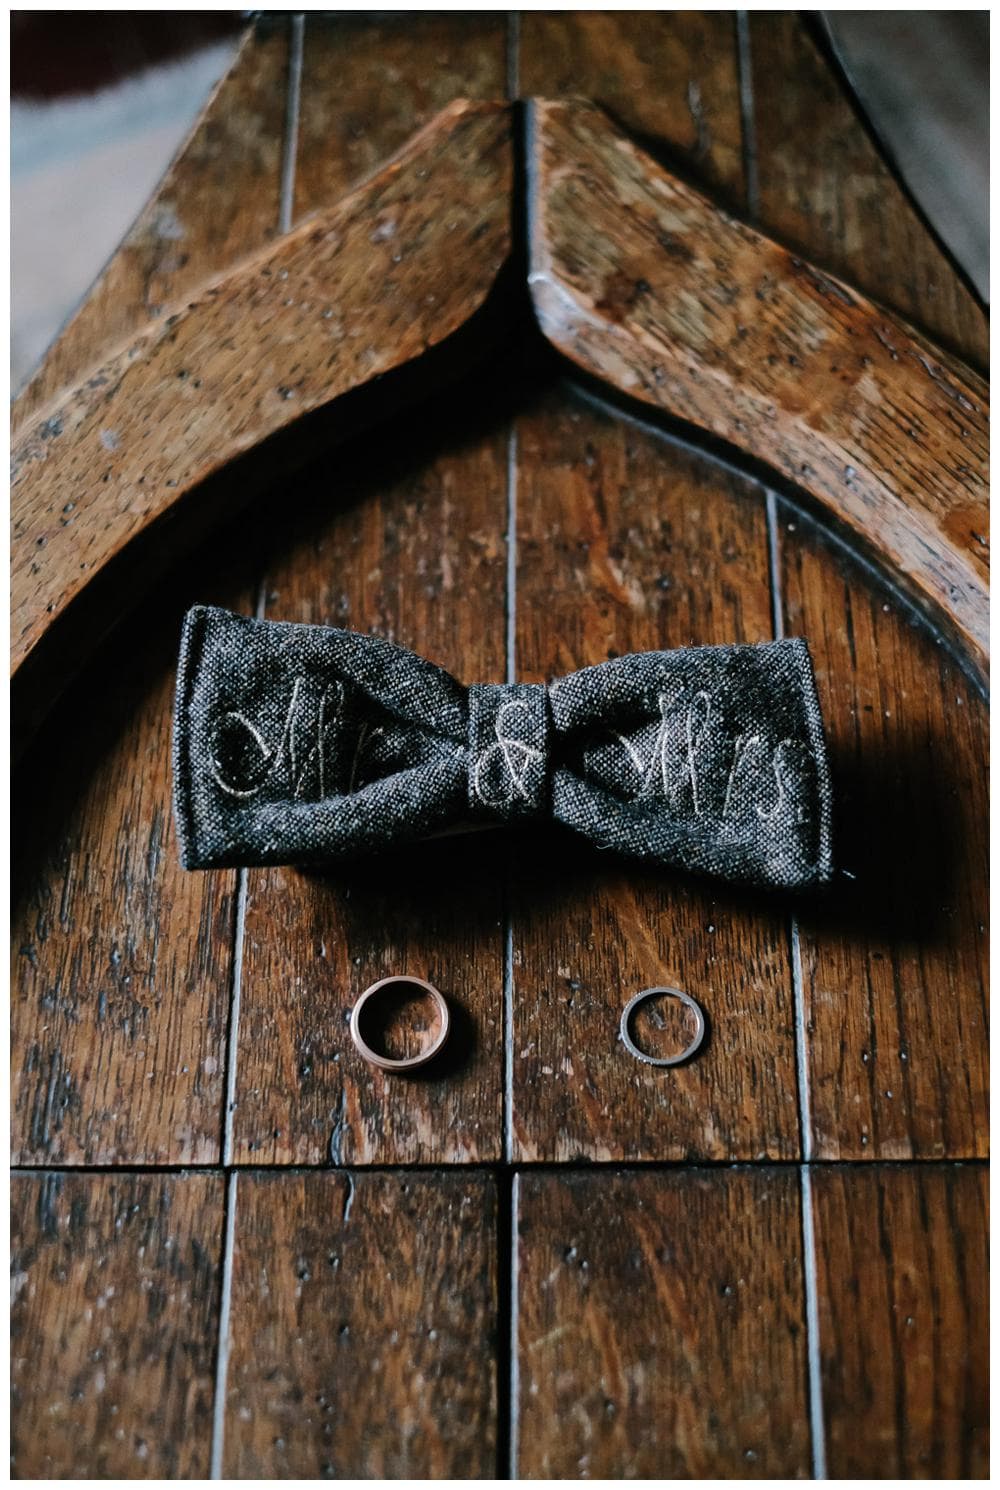 bow tie for dog with wedding bands in france #bowtie #dogring #weddingring #dogrings